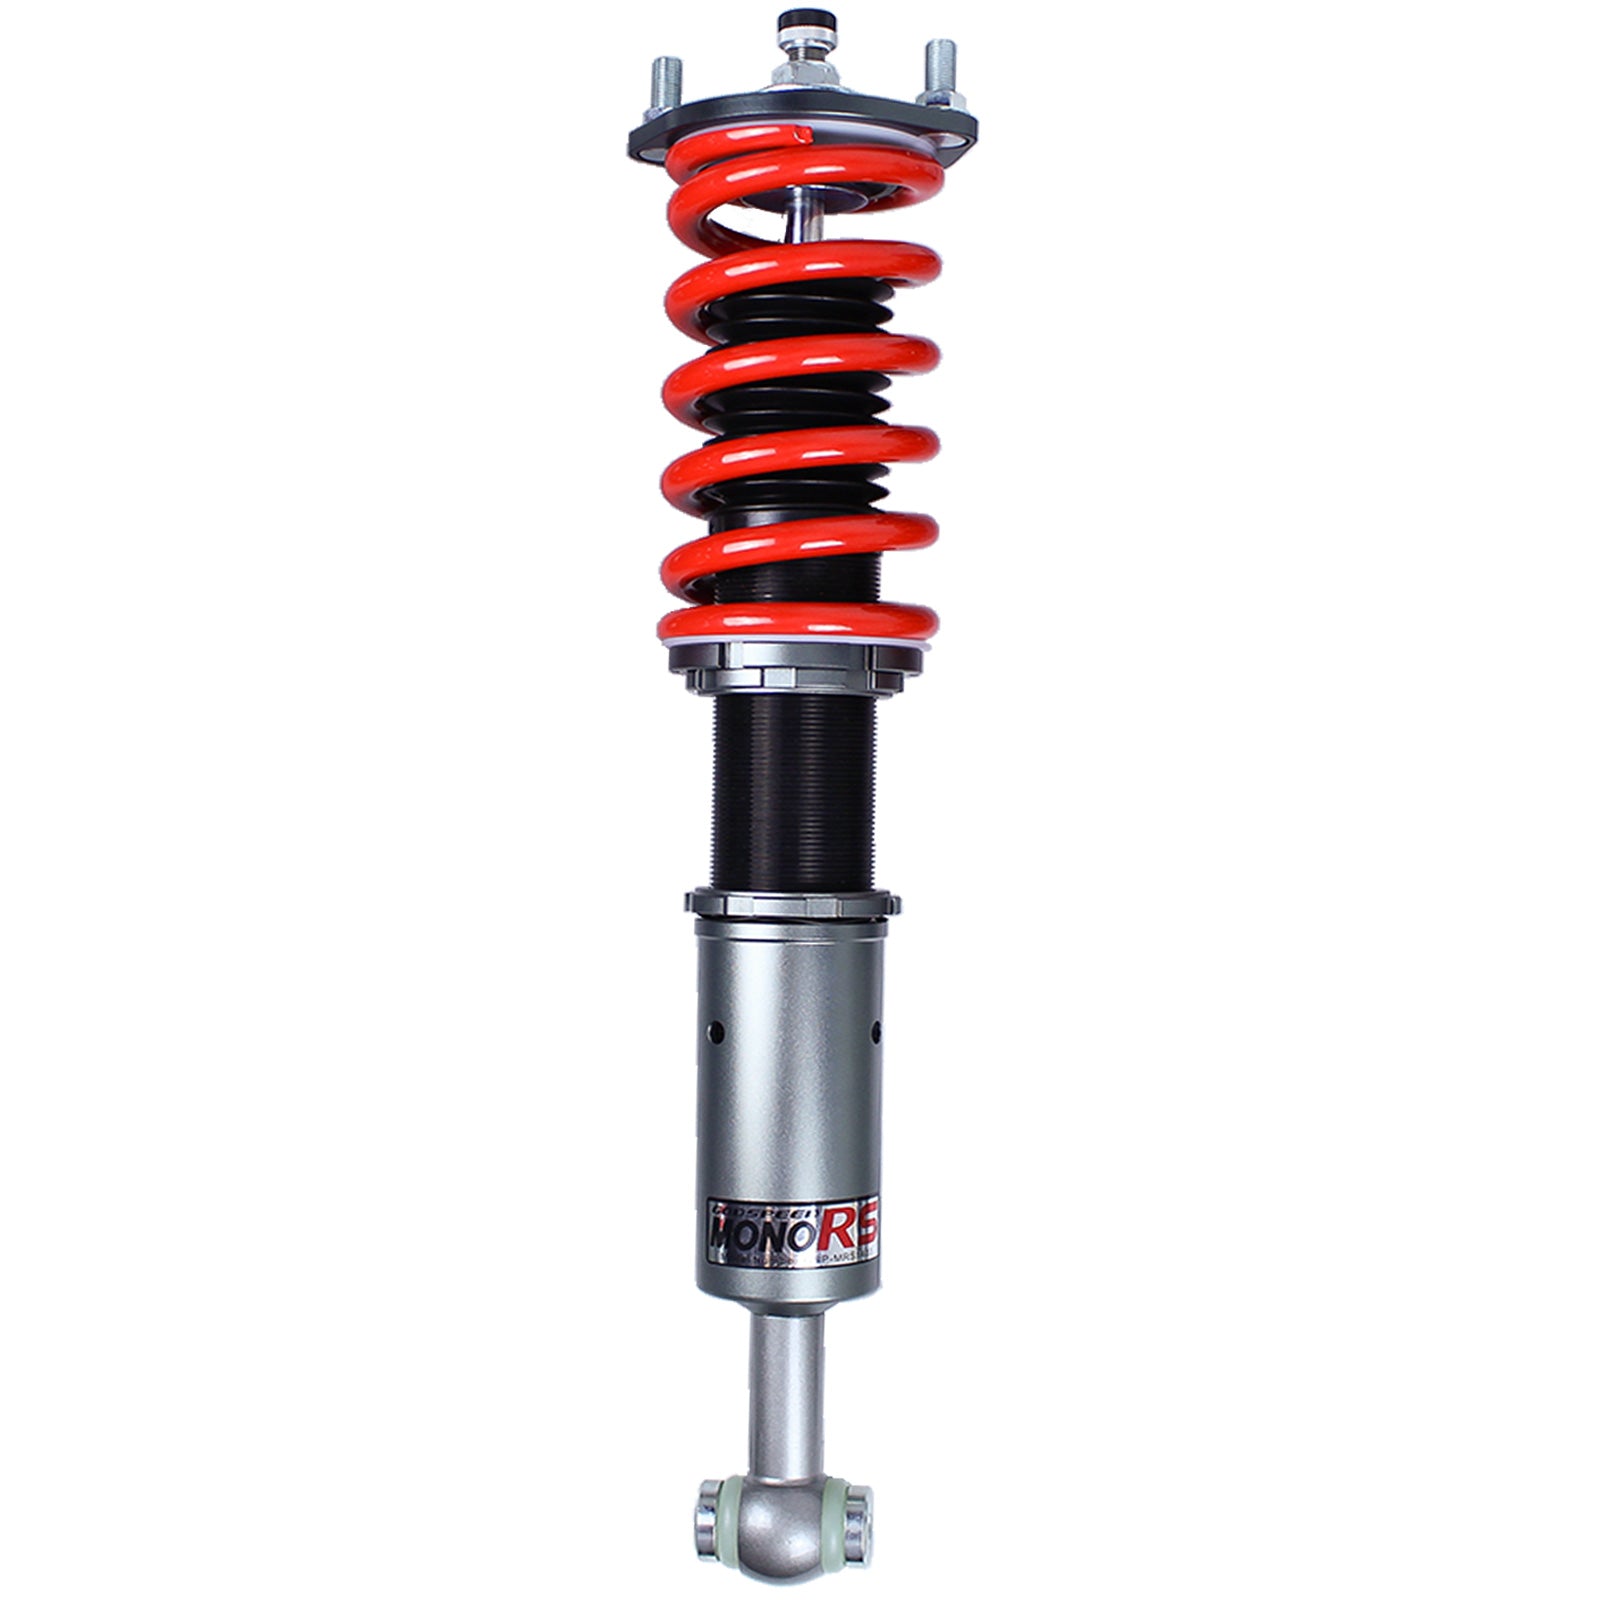 Godspeed MRS1403 MonoRS Coilover Lowering Kit, 32 Damping Adjustment, Ride Height Adjustable